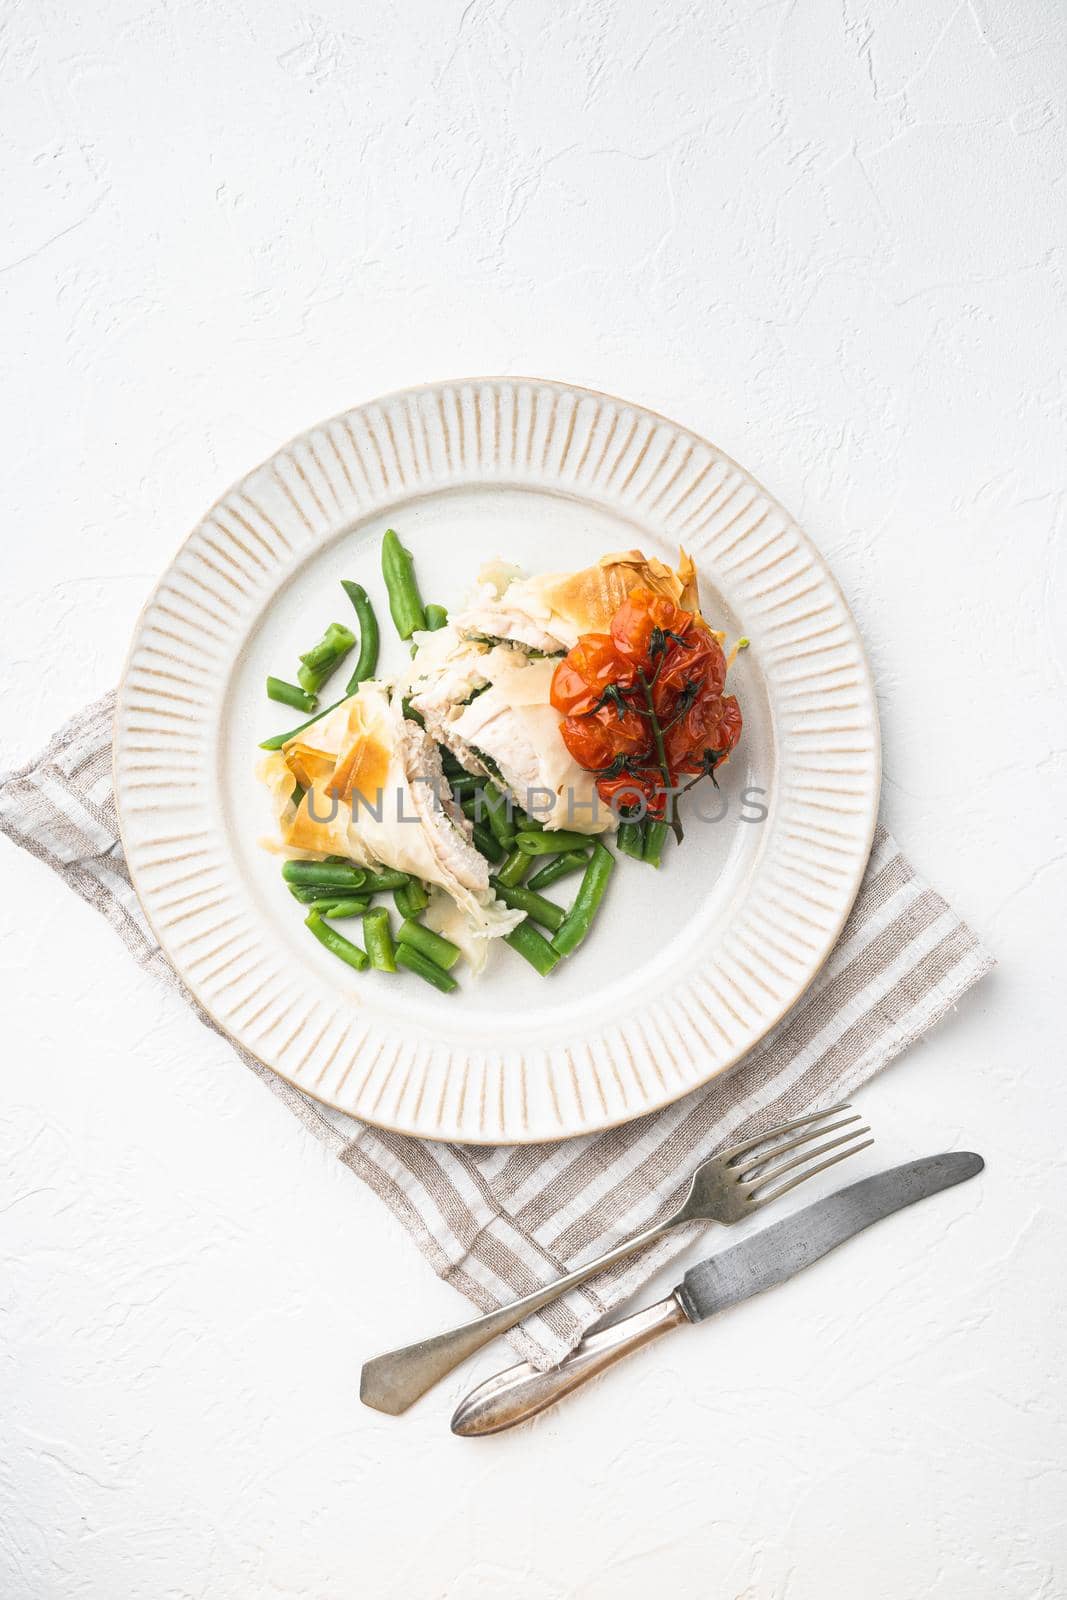 Russian cuisine stuffed chicken cutlets kiev style set, with baked cherry tomatoes And green beans, on white stone background, top view flat lay, with copy space for text